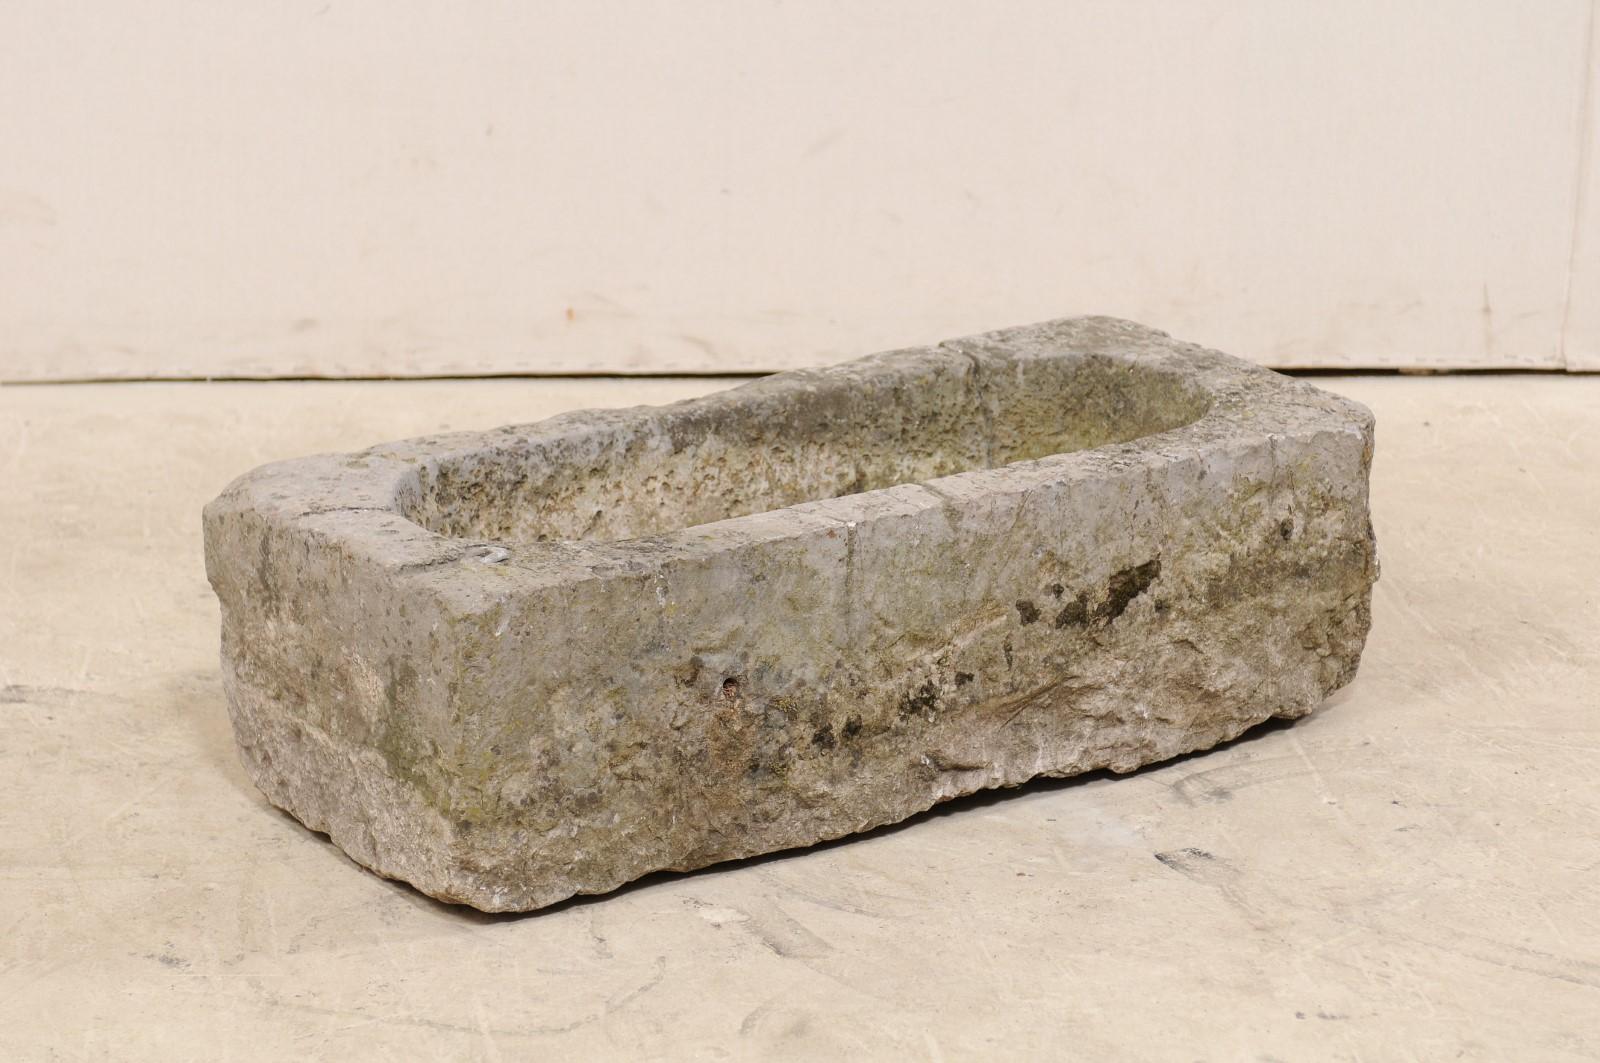 A Spanish carved stone basin or planter from the 19th century. This antique trough from Spain, has a rectangular shape exterior with elongated oval basin interior, and has been hand carved out of a single piece of stone. The basin has a nicely